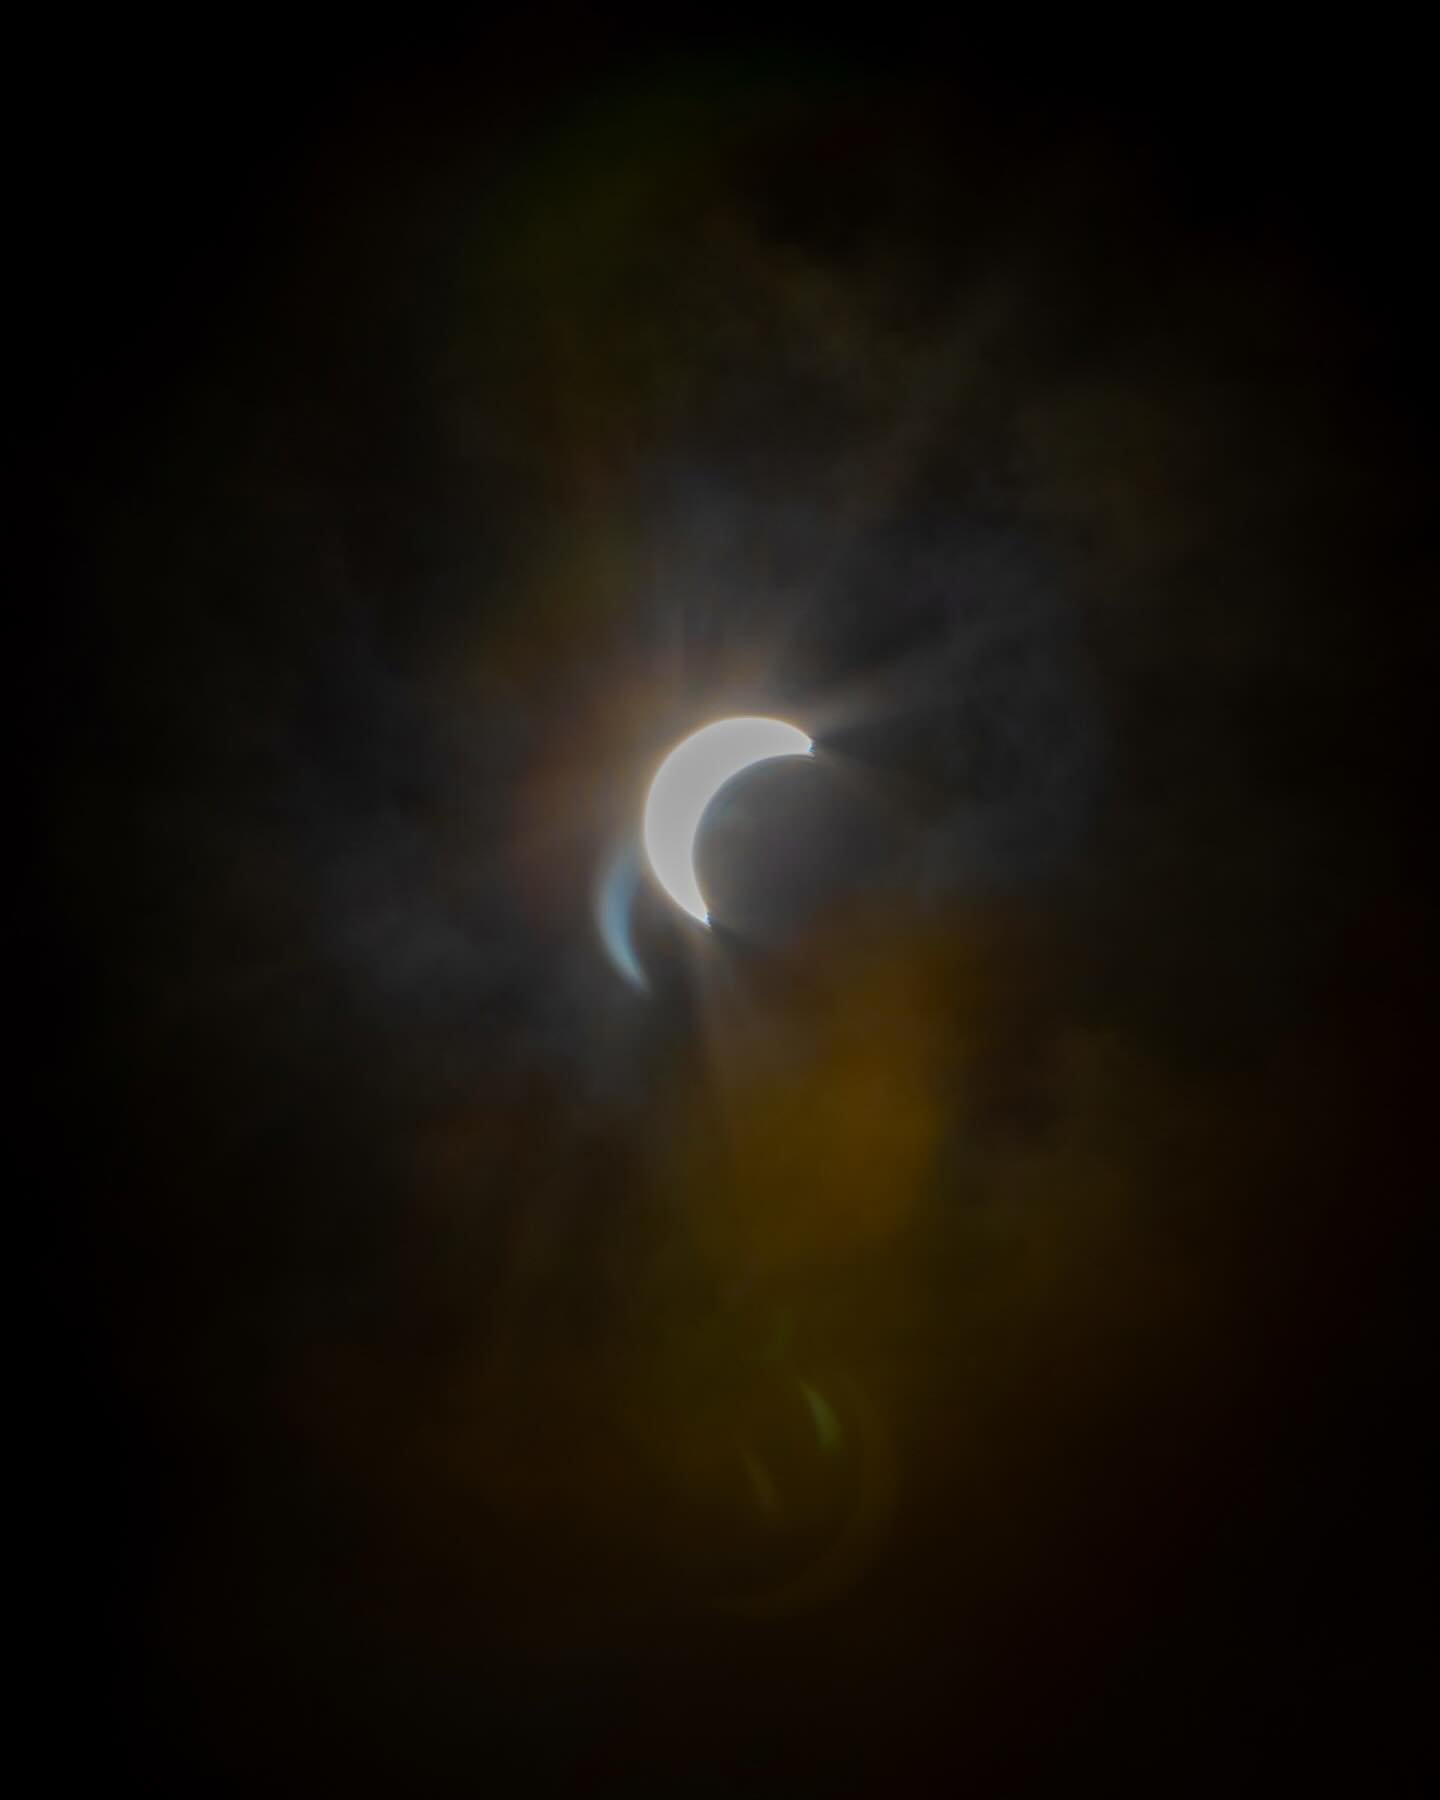 It was fun to get in on the fun today at least 88% of it :)

#solareclipse #notmyusualthingbut :) #anyoneelseseeafaceintheclouds